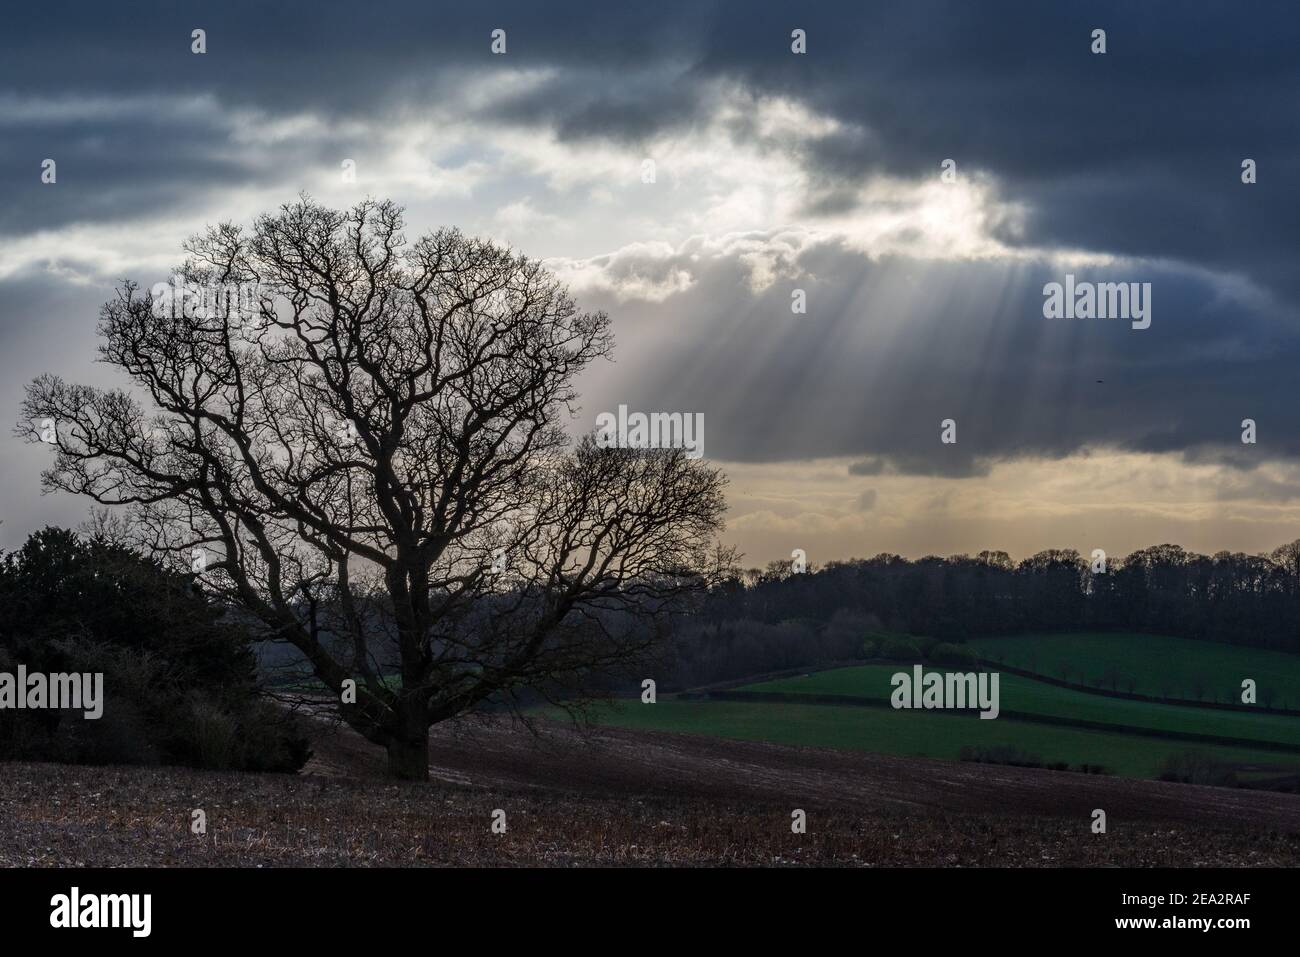 Breamore, Fordingbridge, New Forest, Hampshire, UK, 7th February, 2021, Weather: A biting cold easterly wind adds a significant wind chill factor to the already low temperatures. The sun’s rays make a rare appearance over the countryside. Credit: Paul Biggins/Alamy Live News Stock Photo